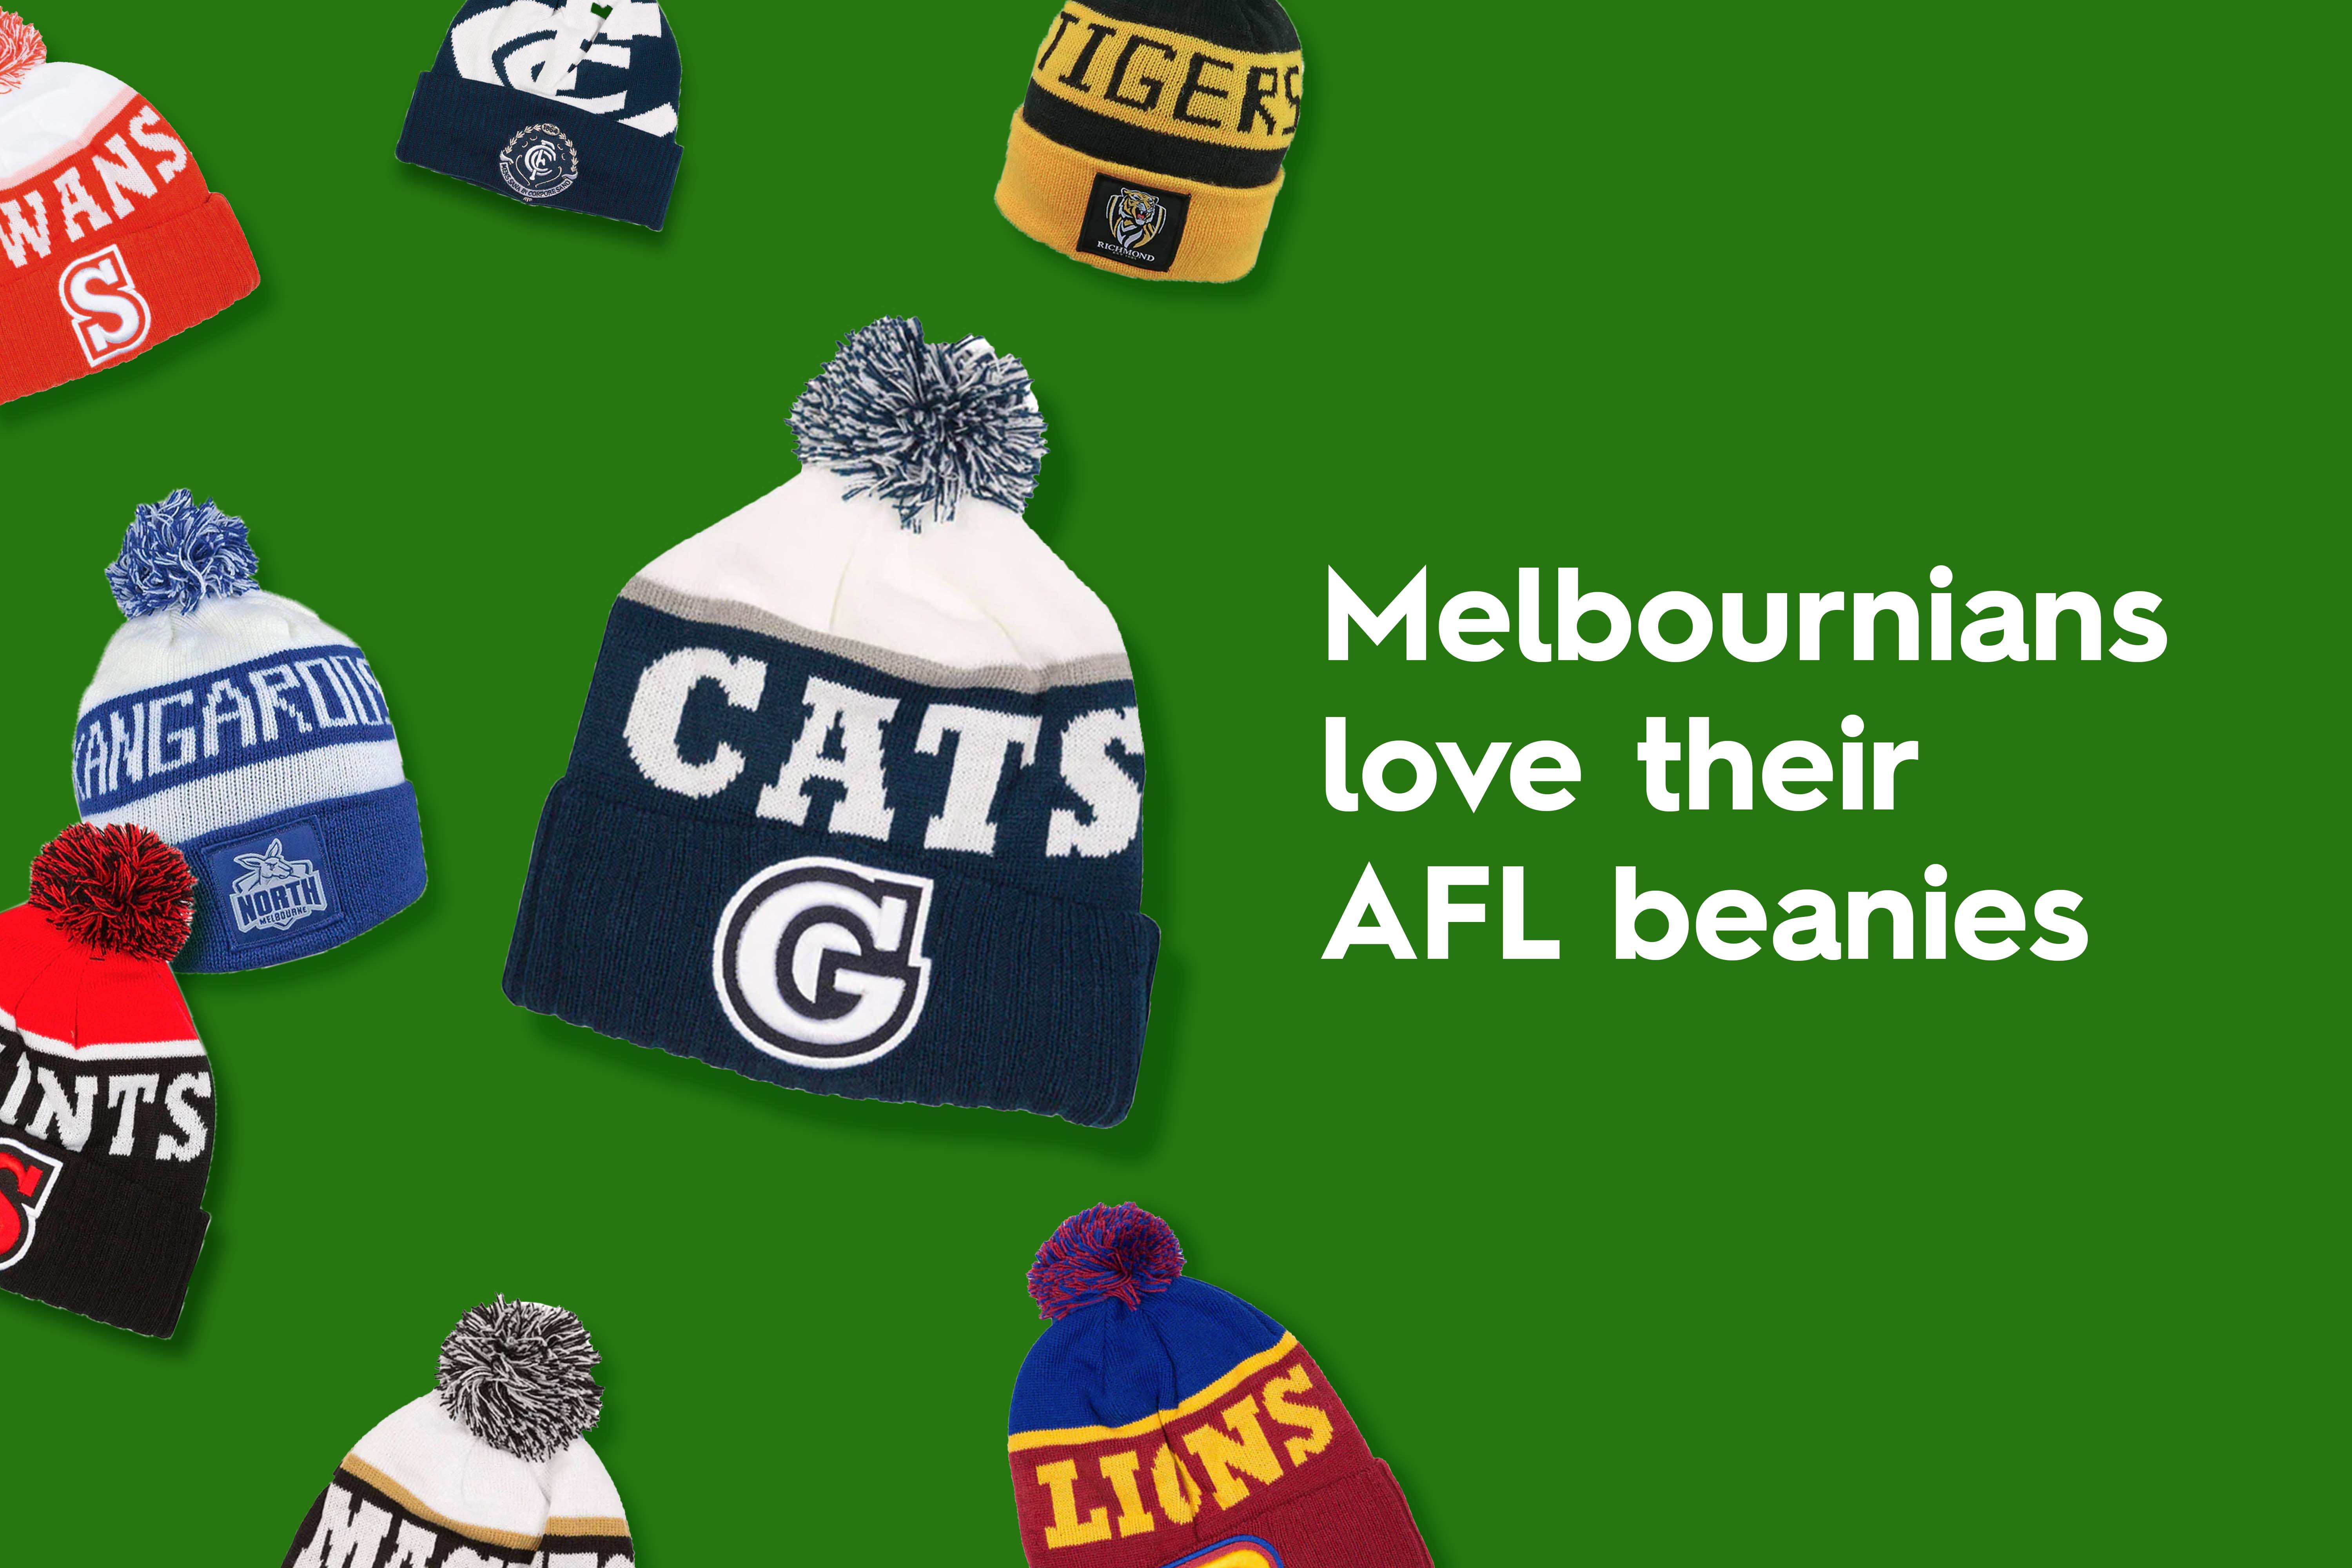 Why are AFL beanies a fashion icon in Melbourne